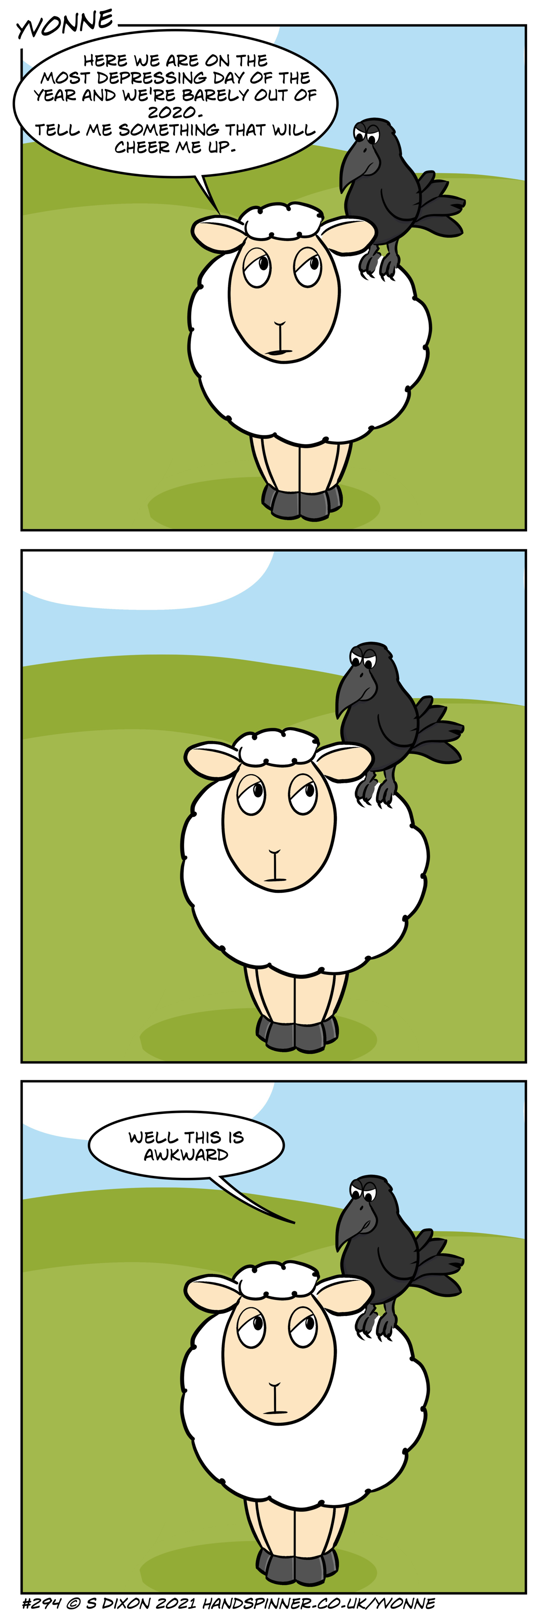 Yvonne the sheep with crow.